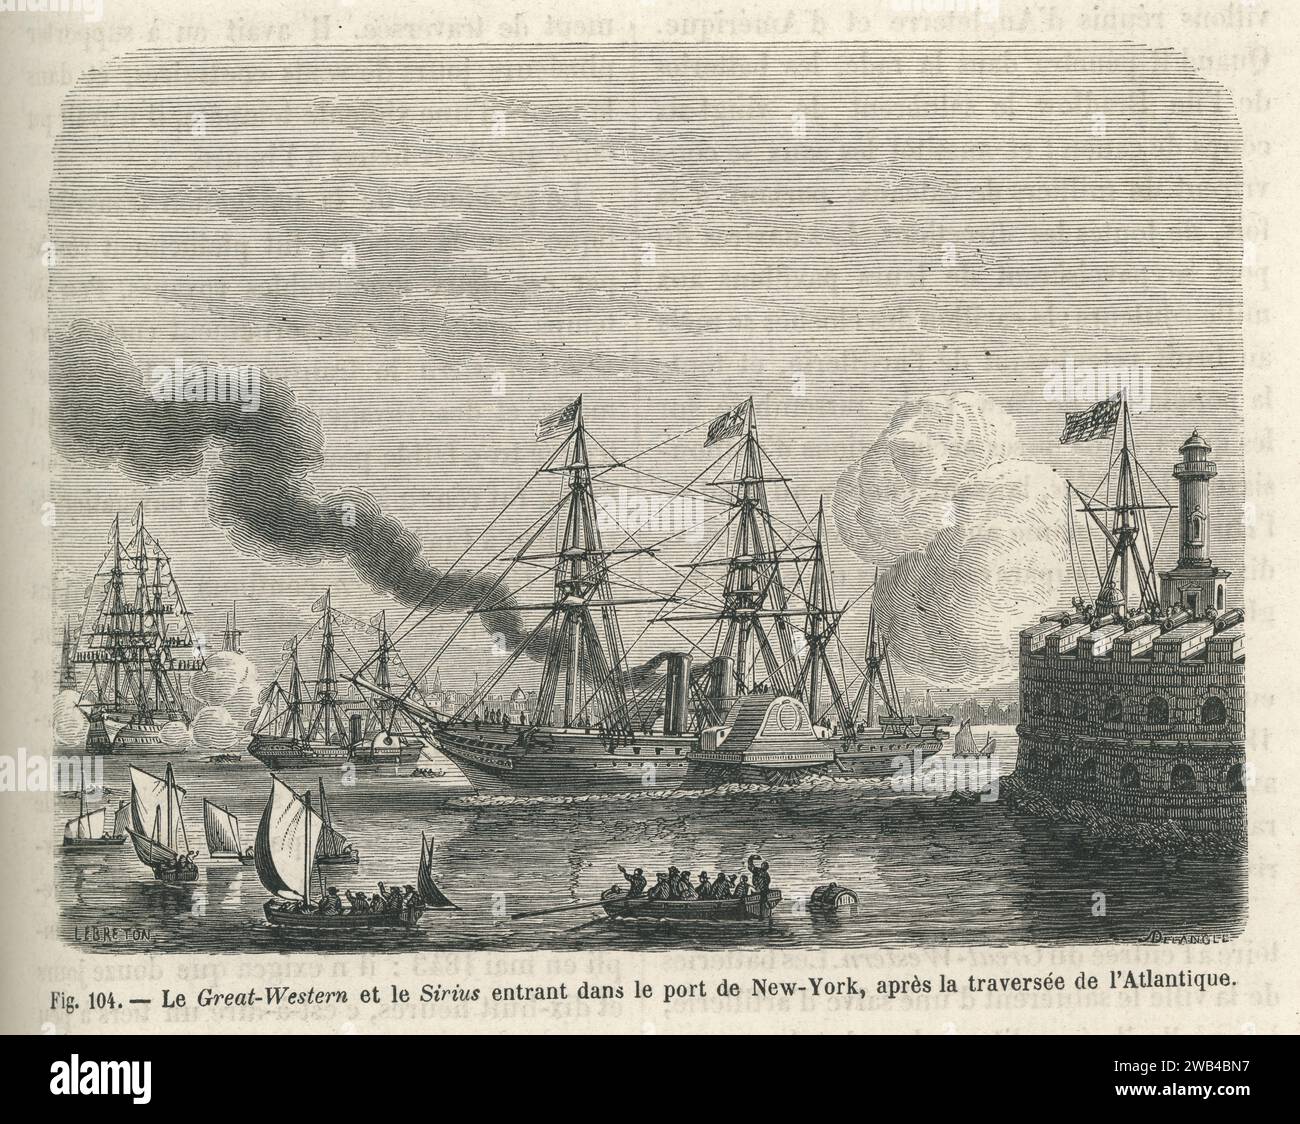 The transatlantic steamships 'Great Western' and the 'Sirius' in New York harbour after their Atlantic crossing in March-April 1838.  Illustration from 'Les Merveilles de la science ou description populaire des inventions modernes' written by Louis Figuier and published in 1867 by Furne, Jouvet et Cie. Stock Photo